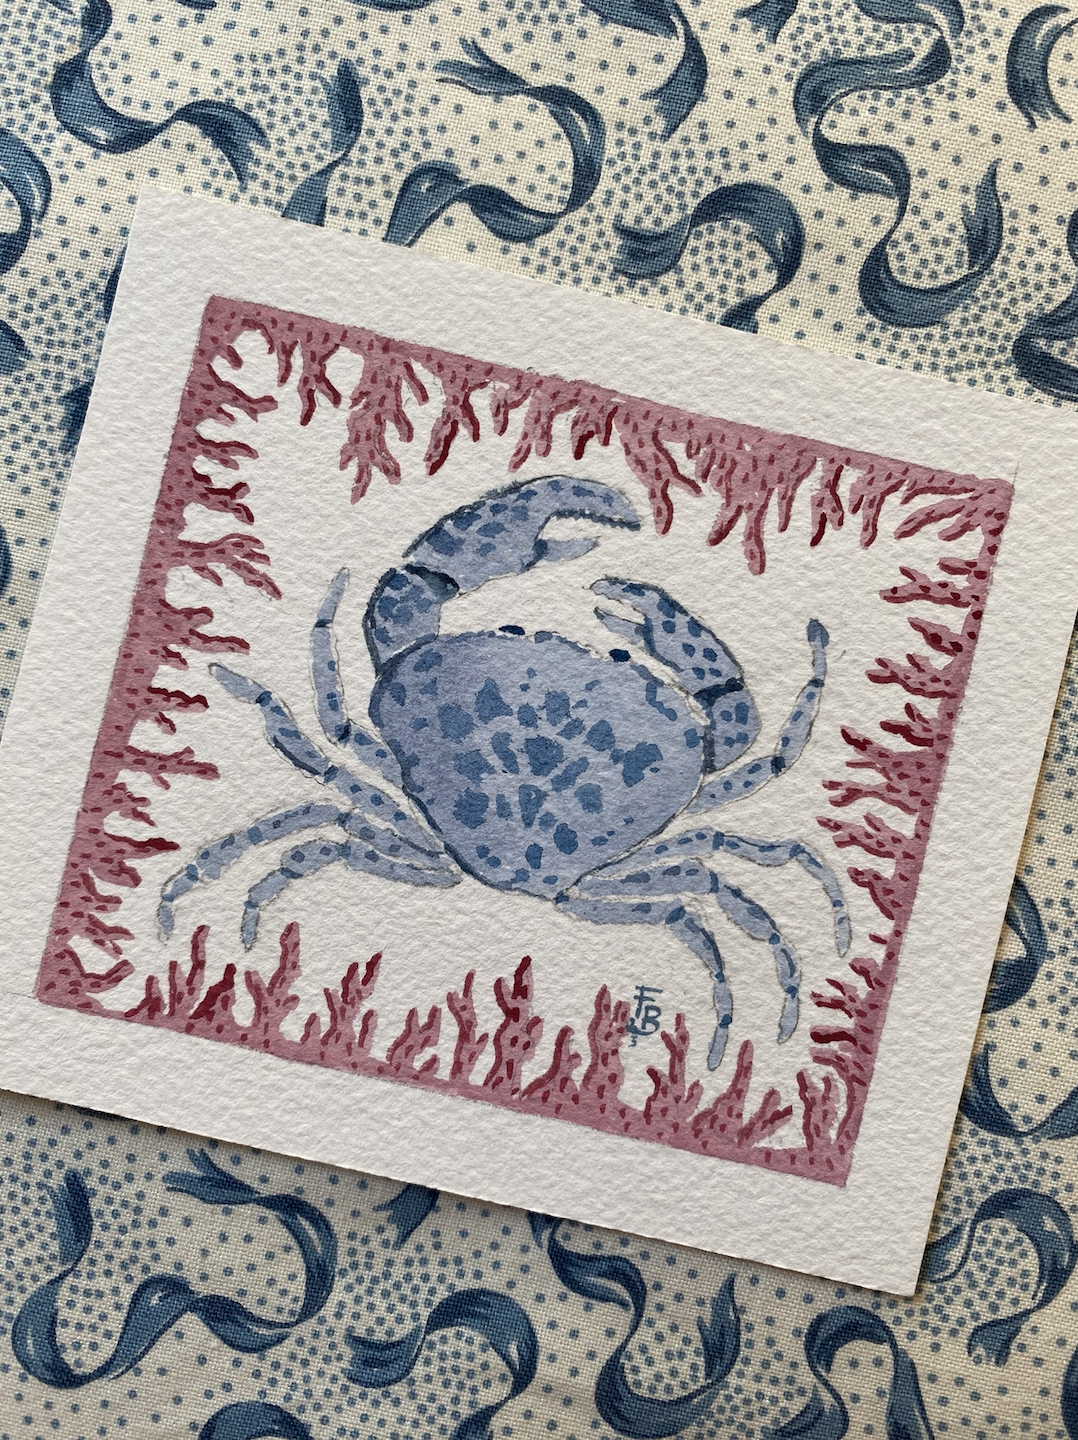 Miniature Watercolour painting - Small Blue Crab